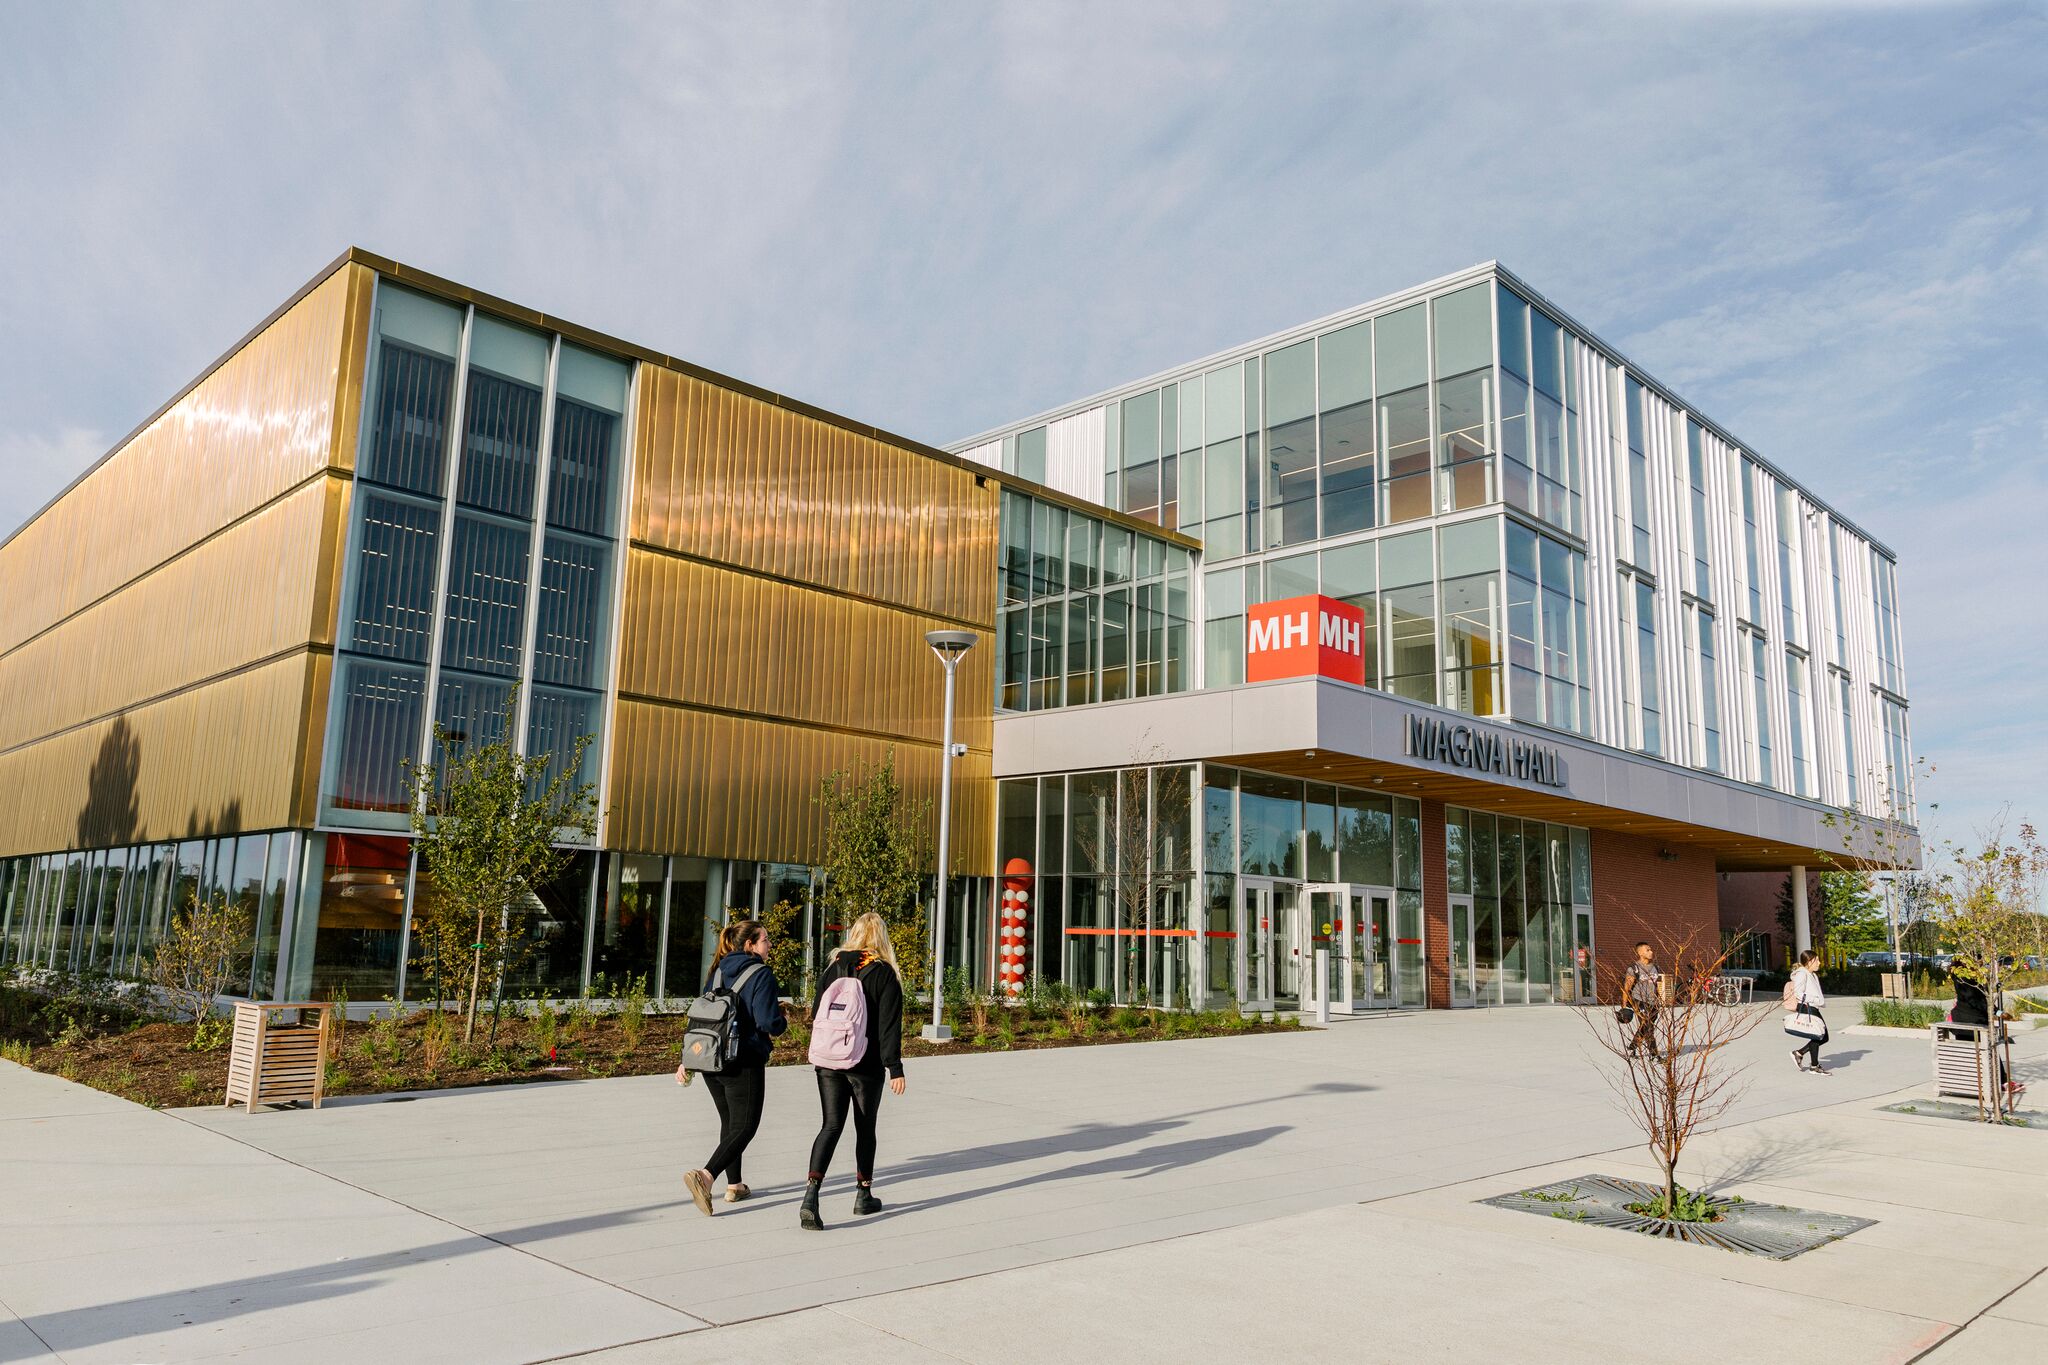 Seneca College Tuition 2022: Scholarship and Cost of Living